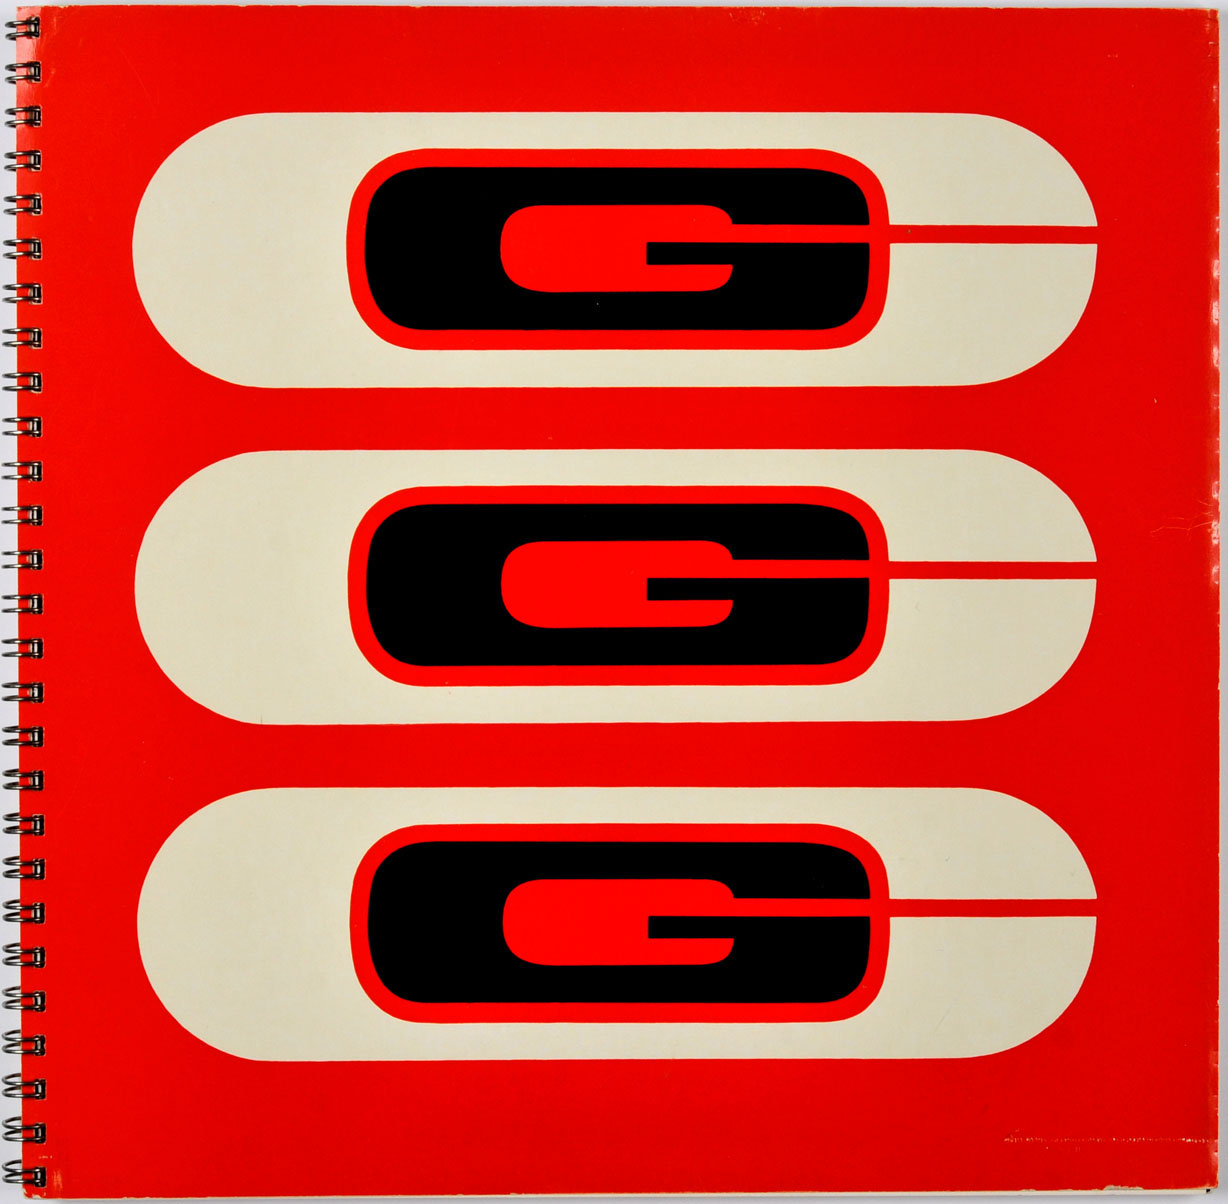 Style book for Connecticut General Insurance Company, 1958, by  Lester Beall.  Courtesy of the Cantor Arts Center